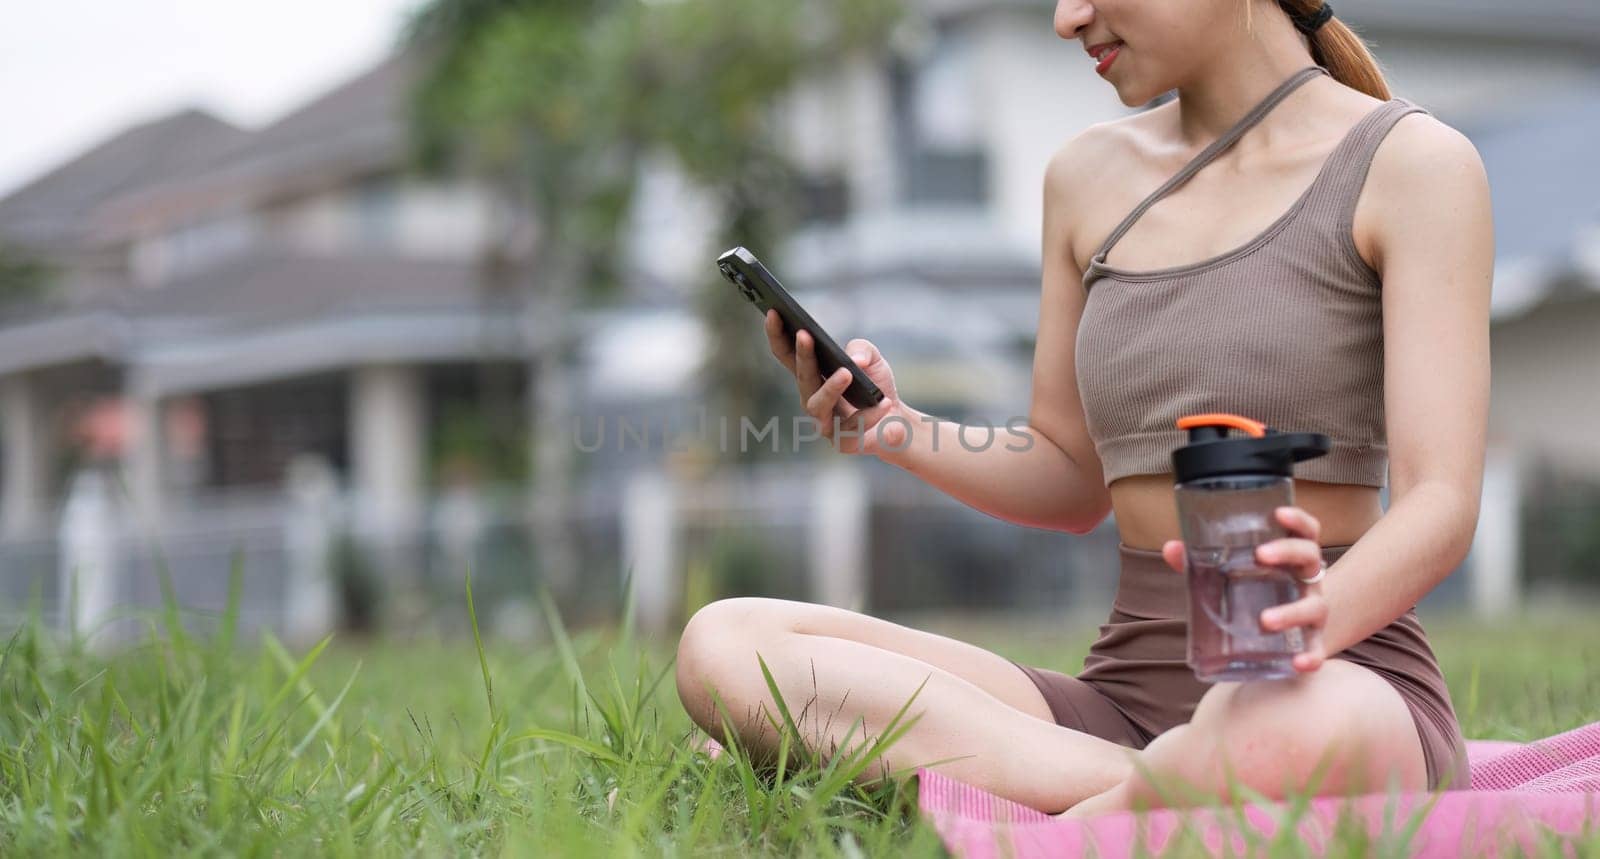 Young woman sitting on an exercise mat Use a smartphone during an outdoor yoga activity on the grass at a park..